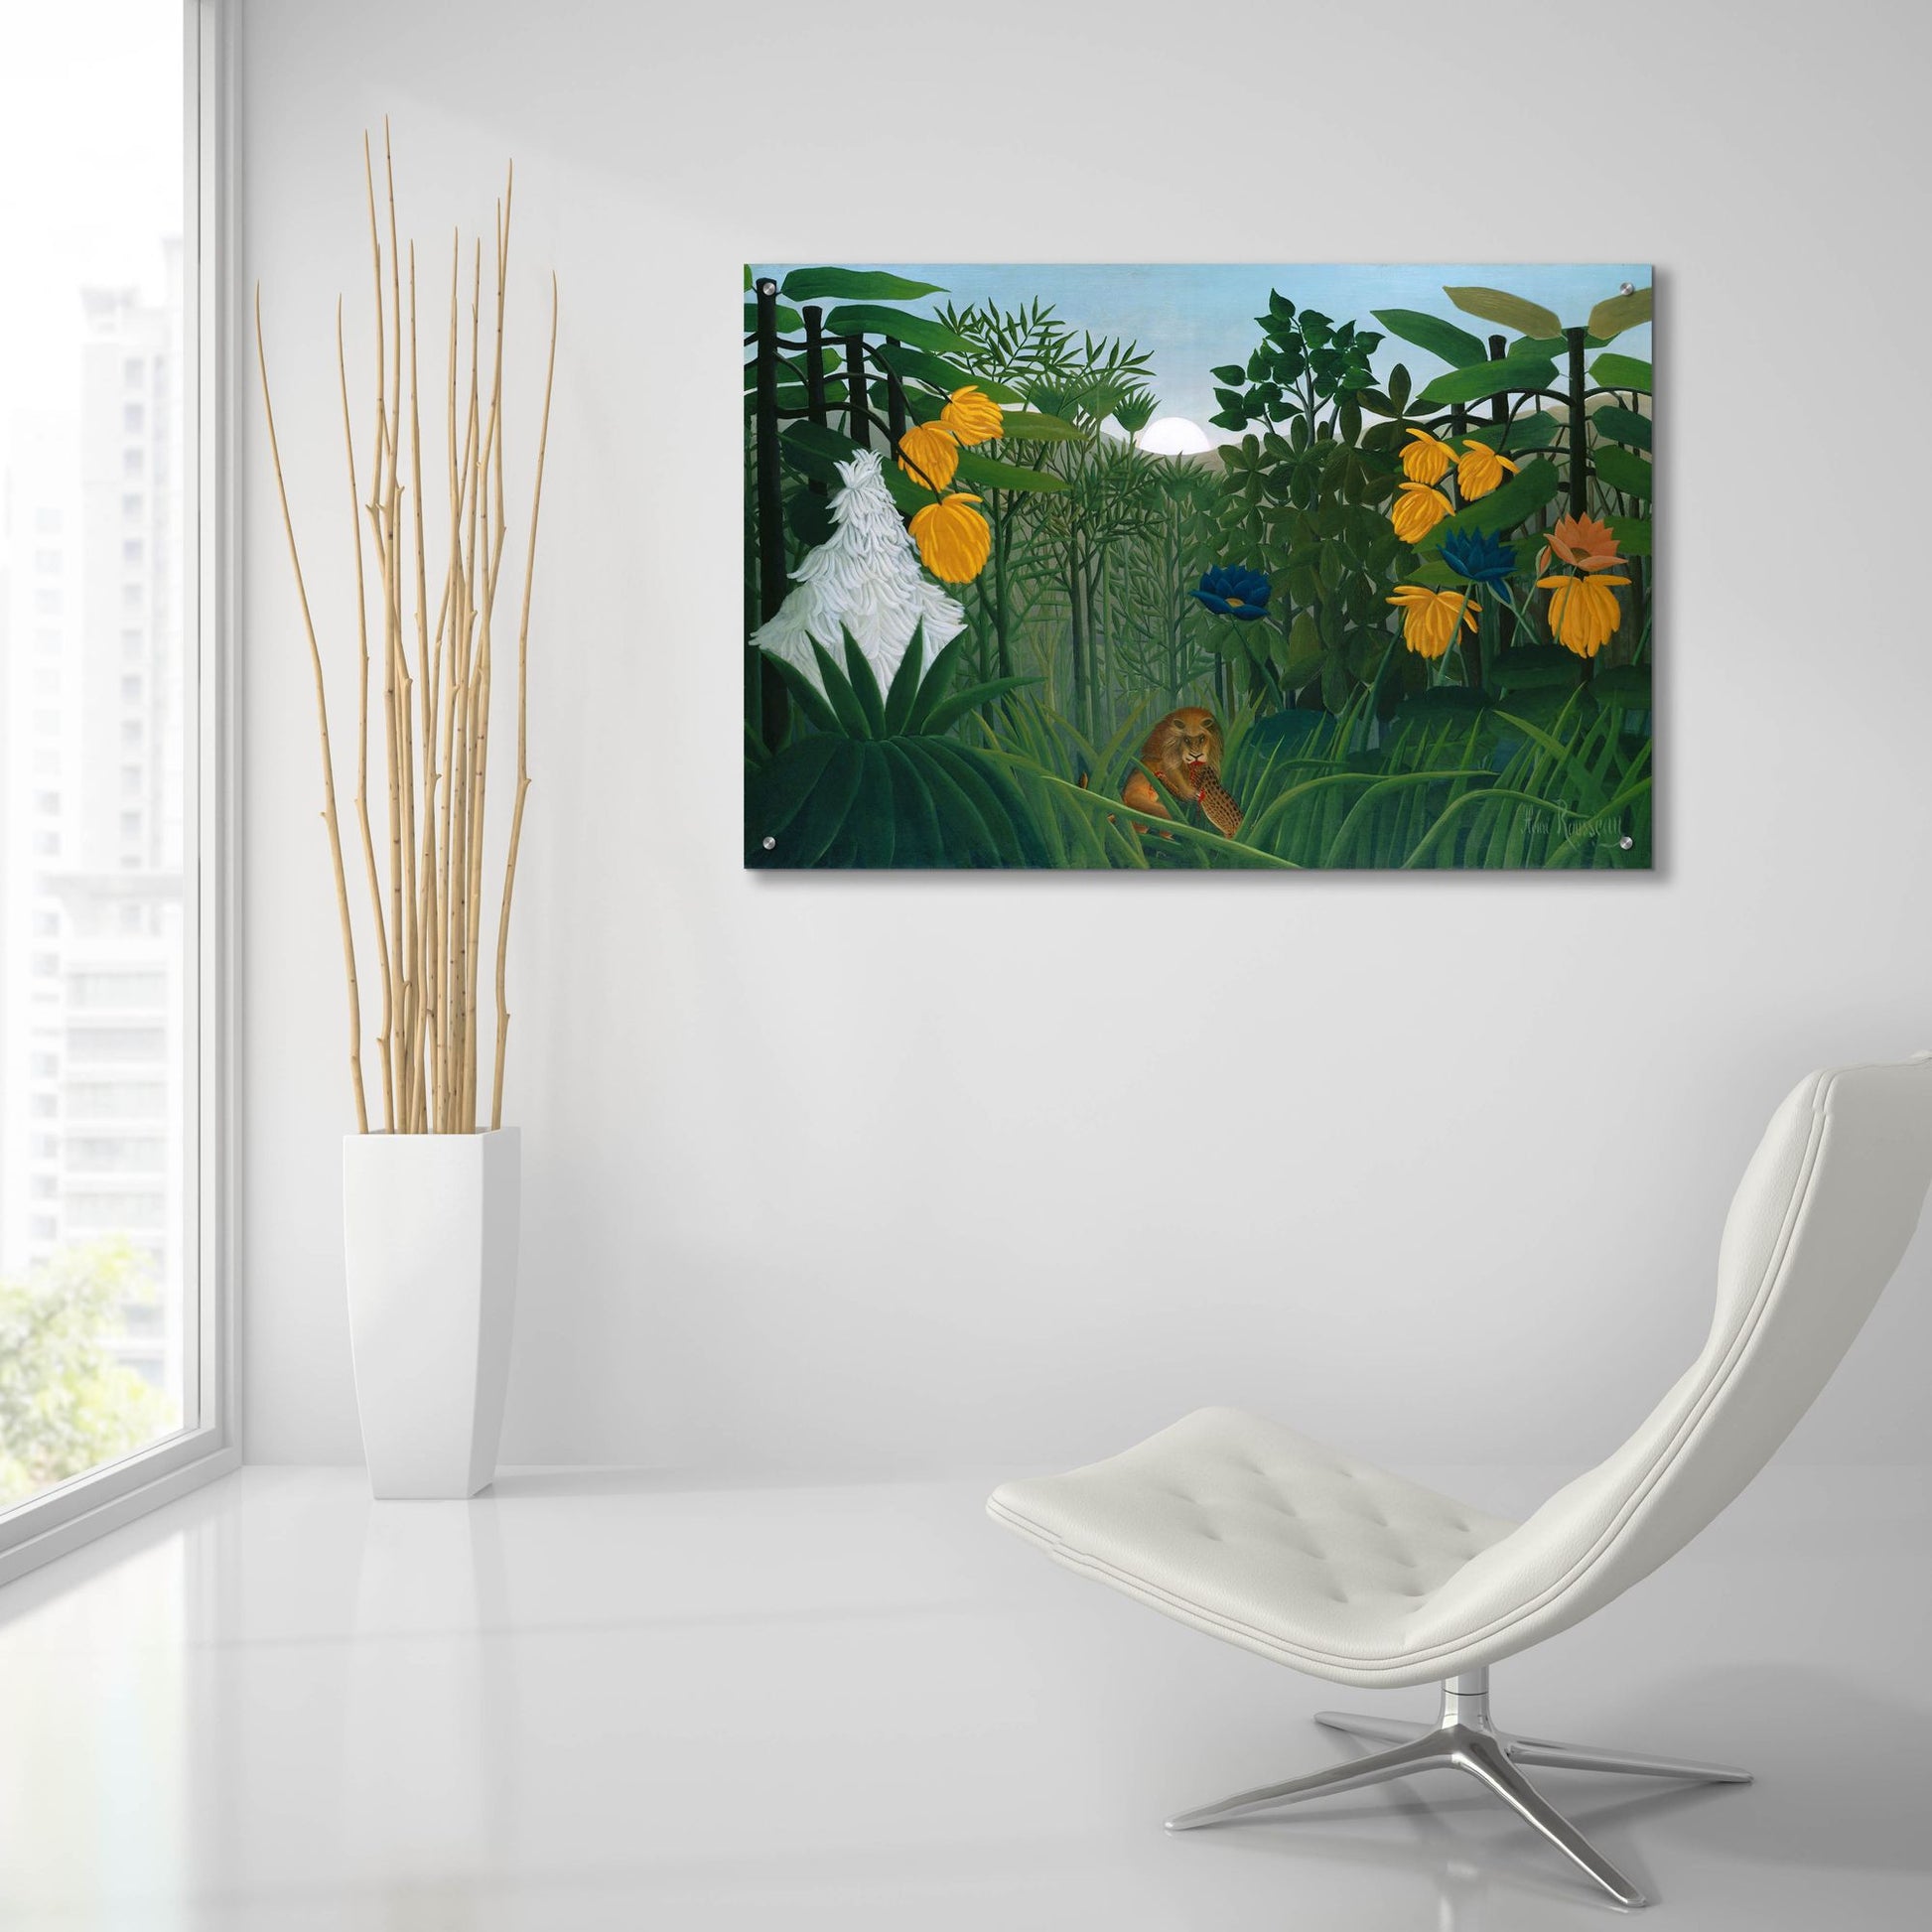 Epic Art ' The Repast of the Lion, 1907' by Henri Rousseau, Acrylic Glass Wall Art,36x24